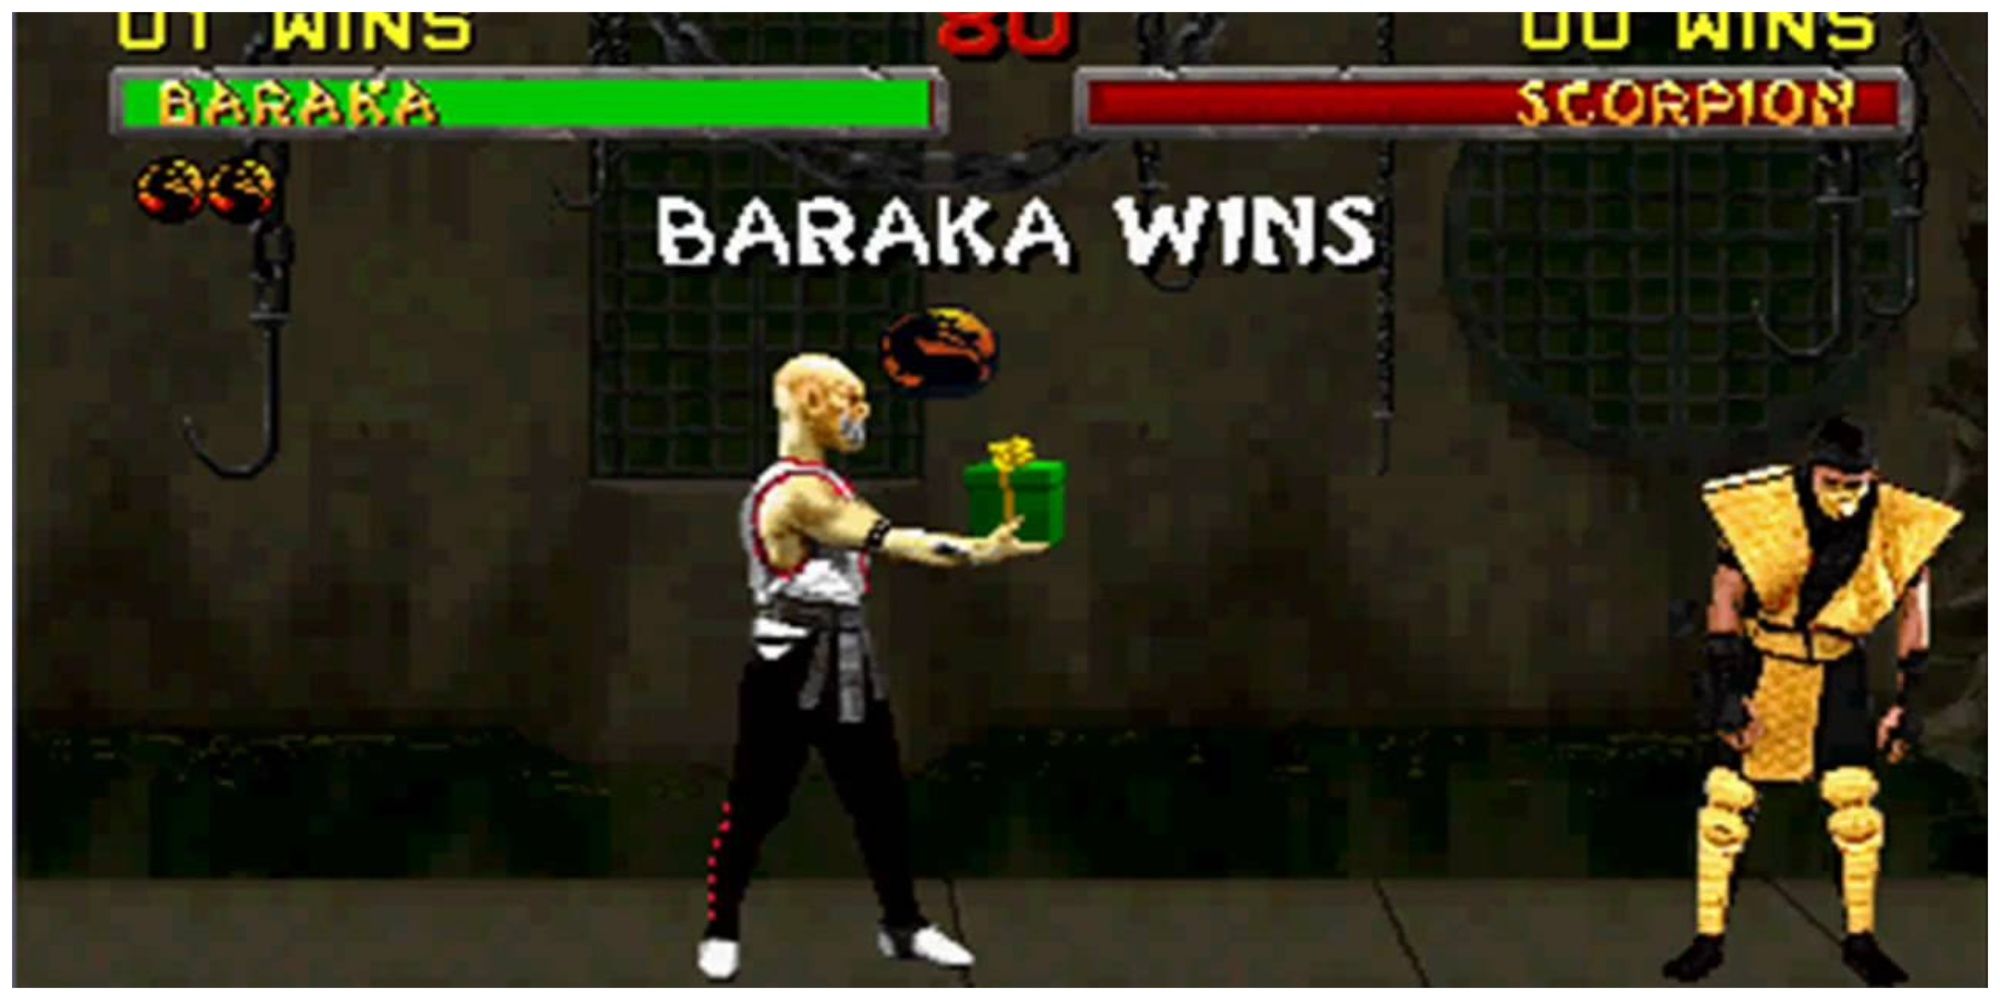 Baraka's Friendship; Gives The Opponent A Gift